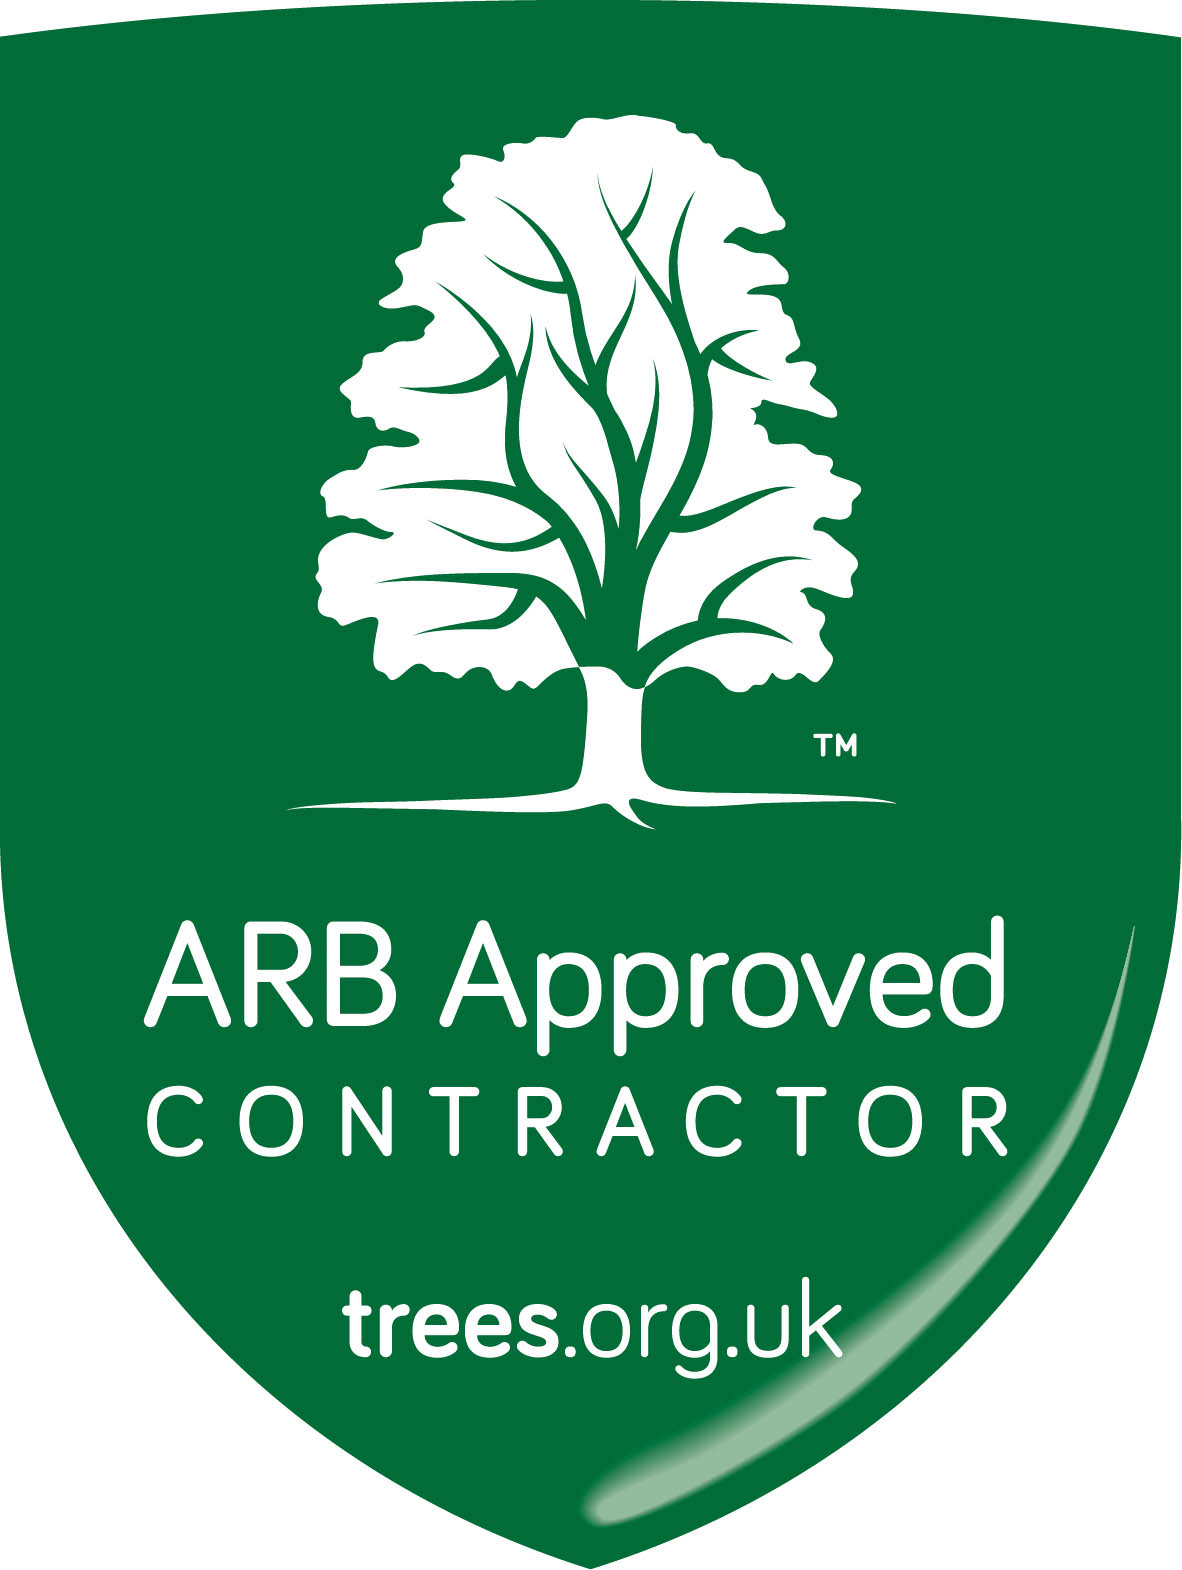 ARB approved contractor logo for Arborists and tree surgeons